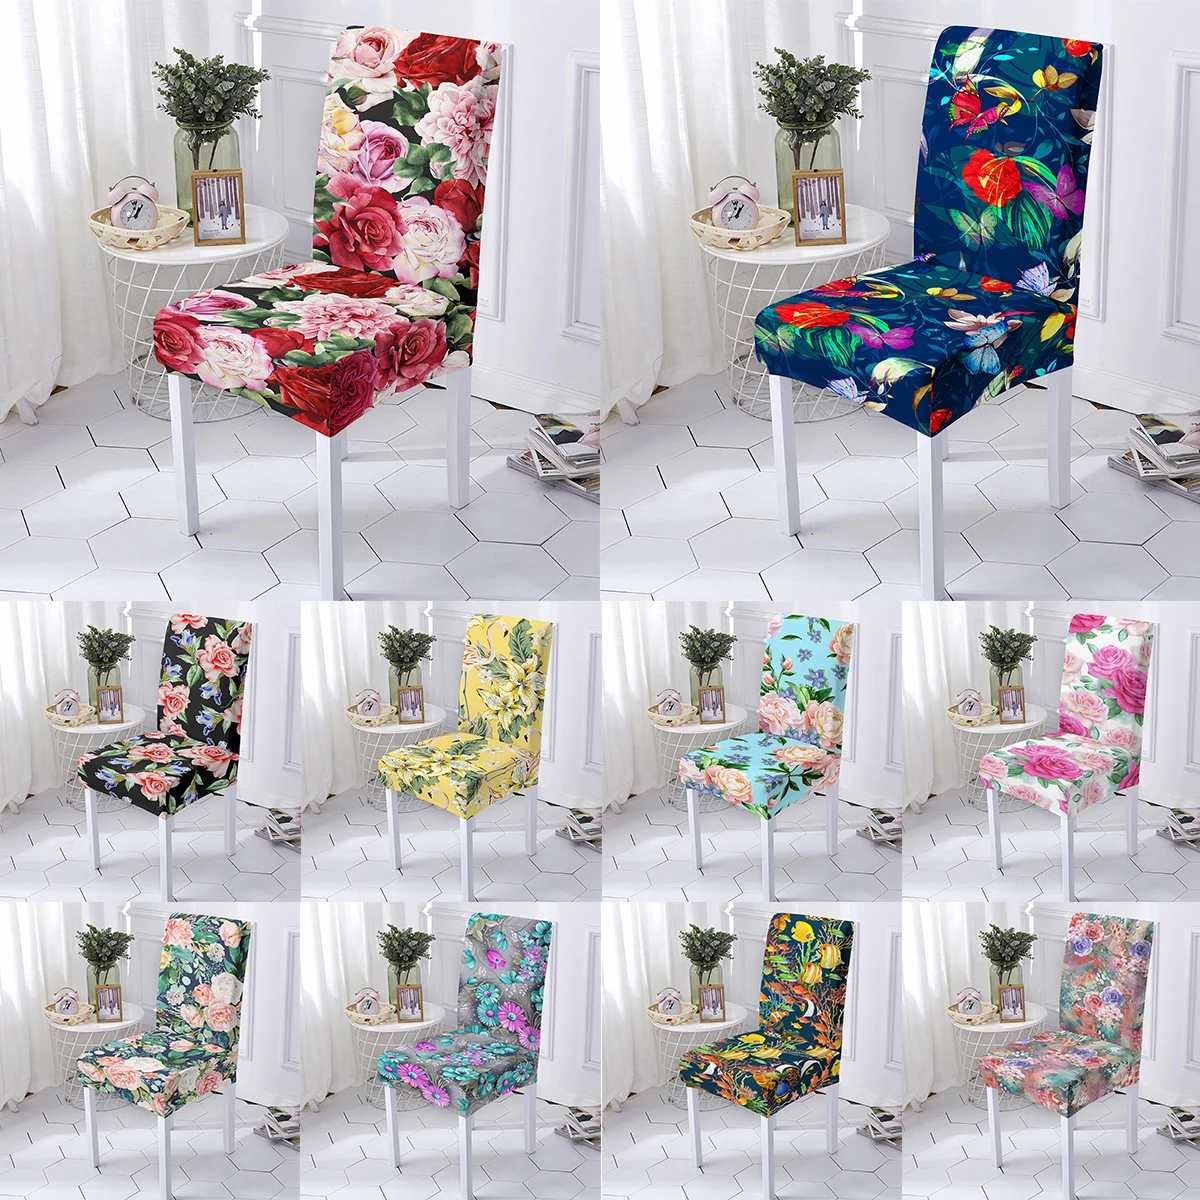 

Rose Flowers Chair Cover Elastic Chair Slipcovers Stretch Dining Chair Covers Used For Wedding Banquet Hotel Mother's Day Gift